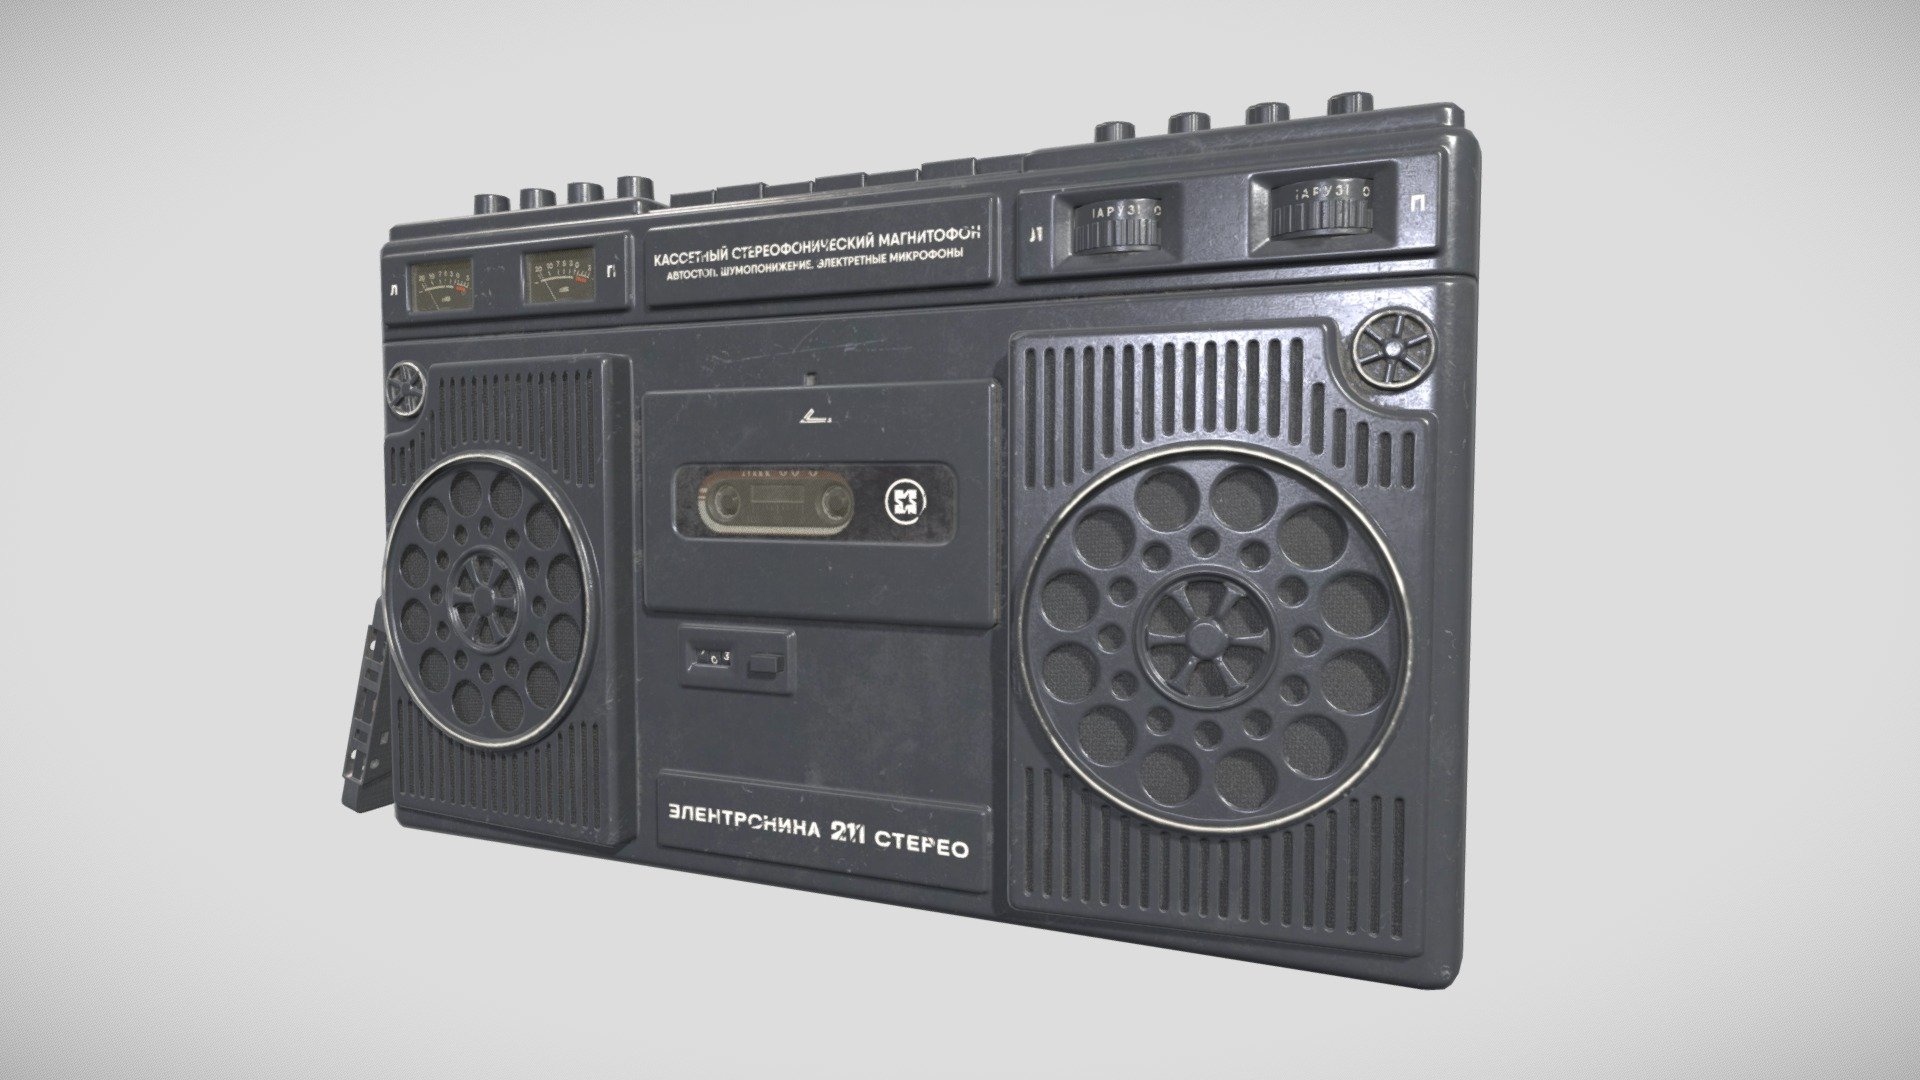 Sovier era tape recorder. Tape recorder is 3886 tris and uses one 4k texture set, the cassette is 1496 tris and uses one 2k texture set. High and Low poly models done in Blender with some polishing in Zbrush. Textured in Substance Painter. Baked and rendered in Marmoset. Thanks to everyone who provided feedback and helped me to make this piece better. Have a nice day!
Artstation link: https://www.artstation.com/artwork/X1Y3KY - Tape Recorder Elektronika-211 - 3D model by Roman Malashkevich (@Malashkevich) 3d model